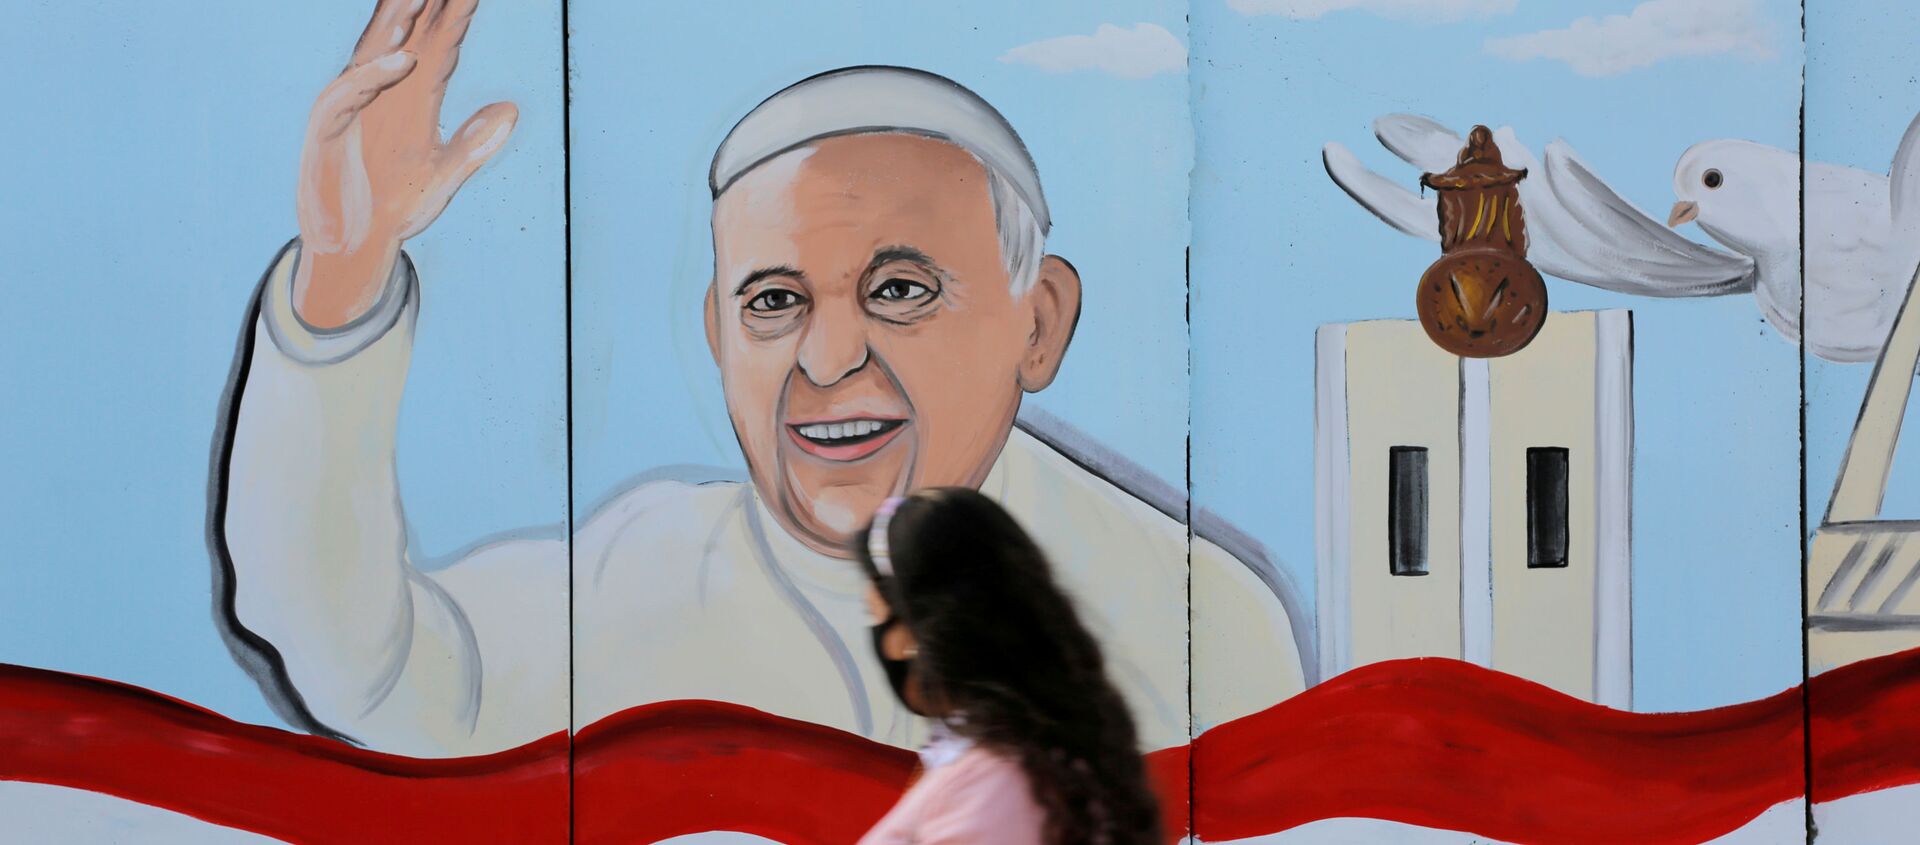 A mural of Pope Franci is seen on the wall of a church upon his upcoming visit to Iraq, in Baghdad. - Sputnik International, 1920, 02.03.2021